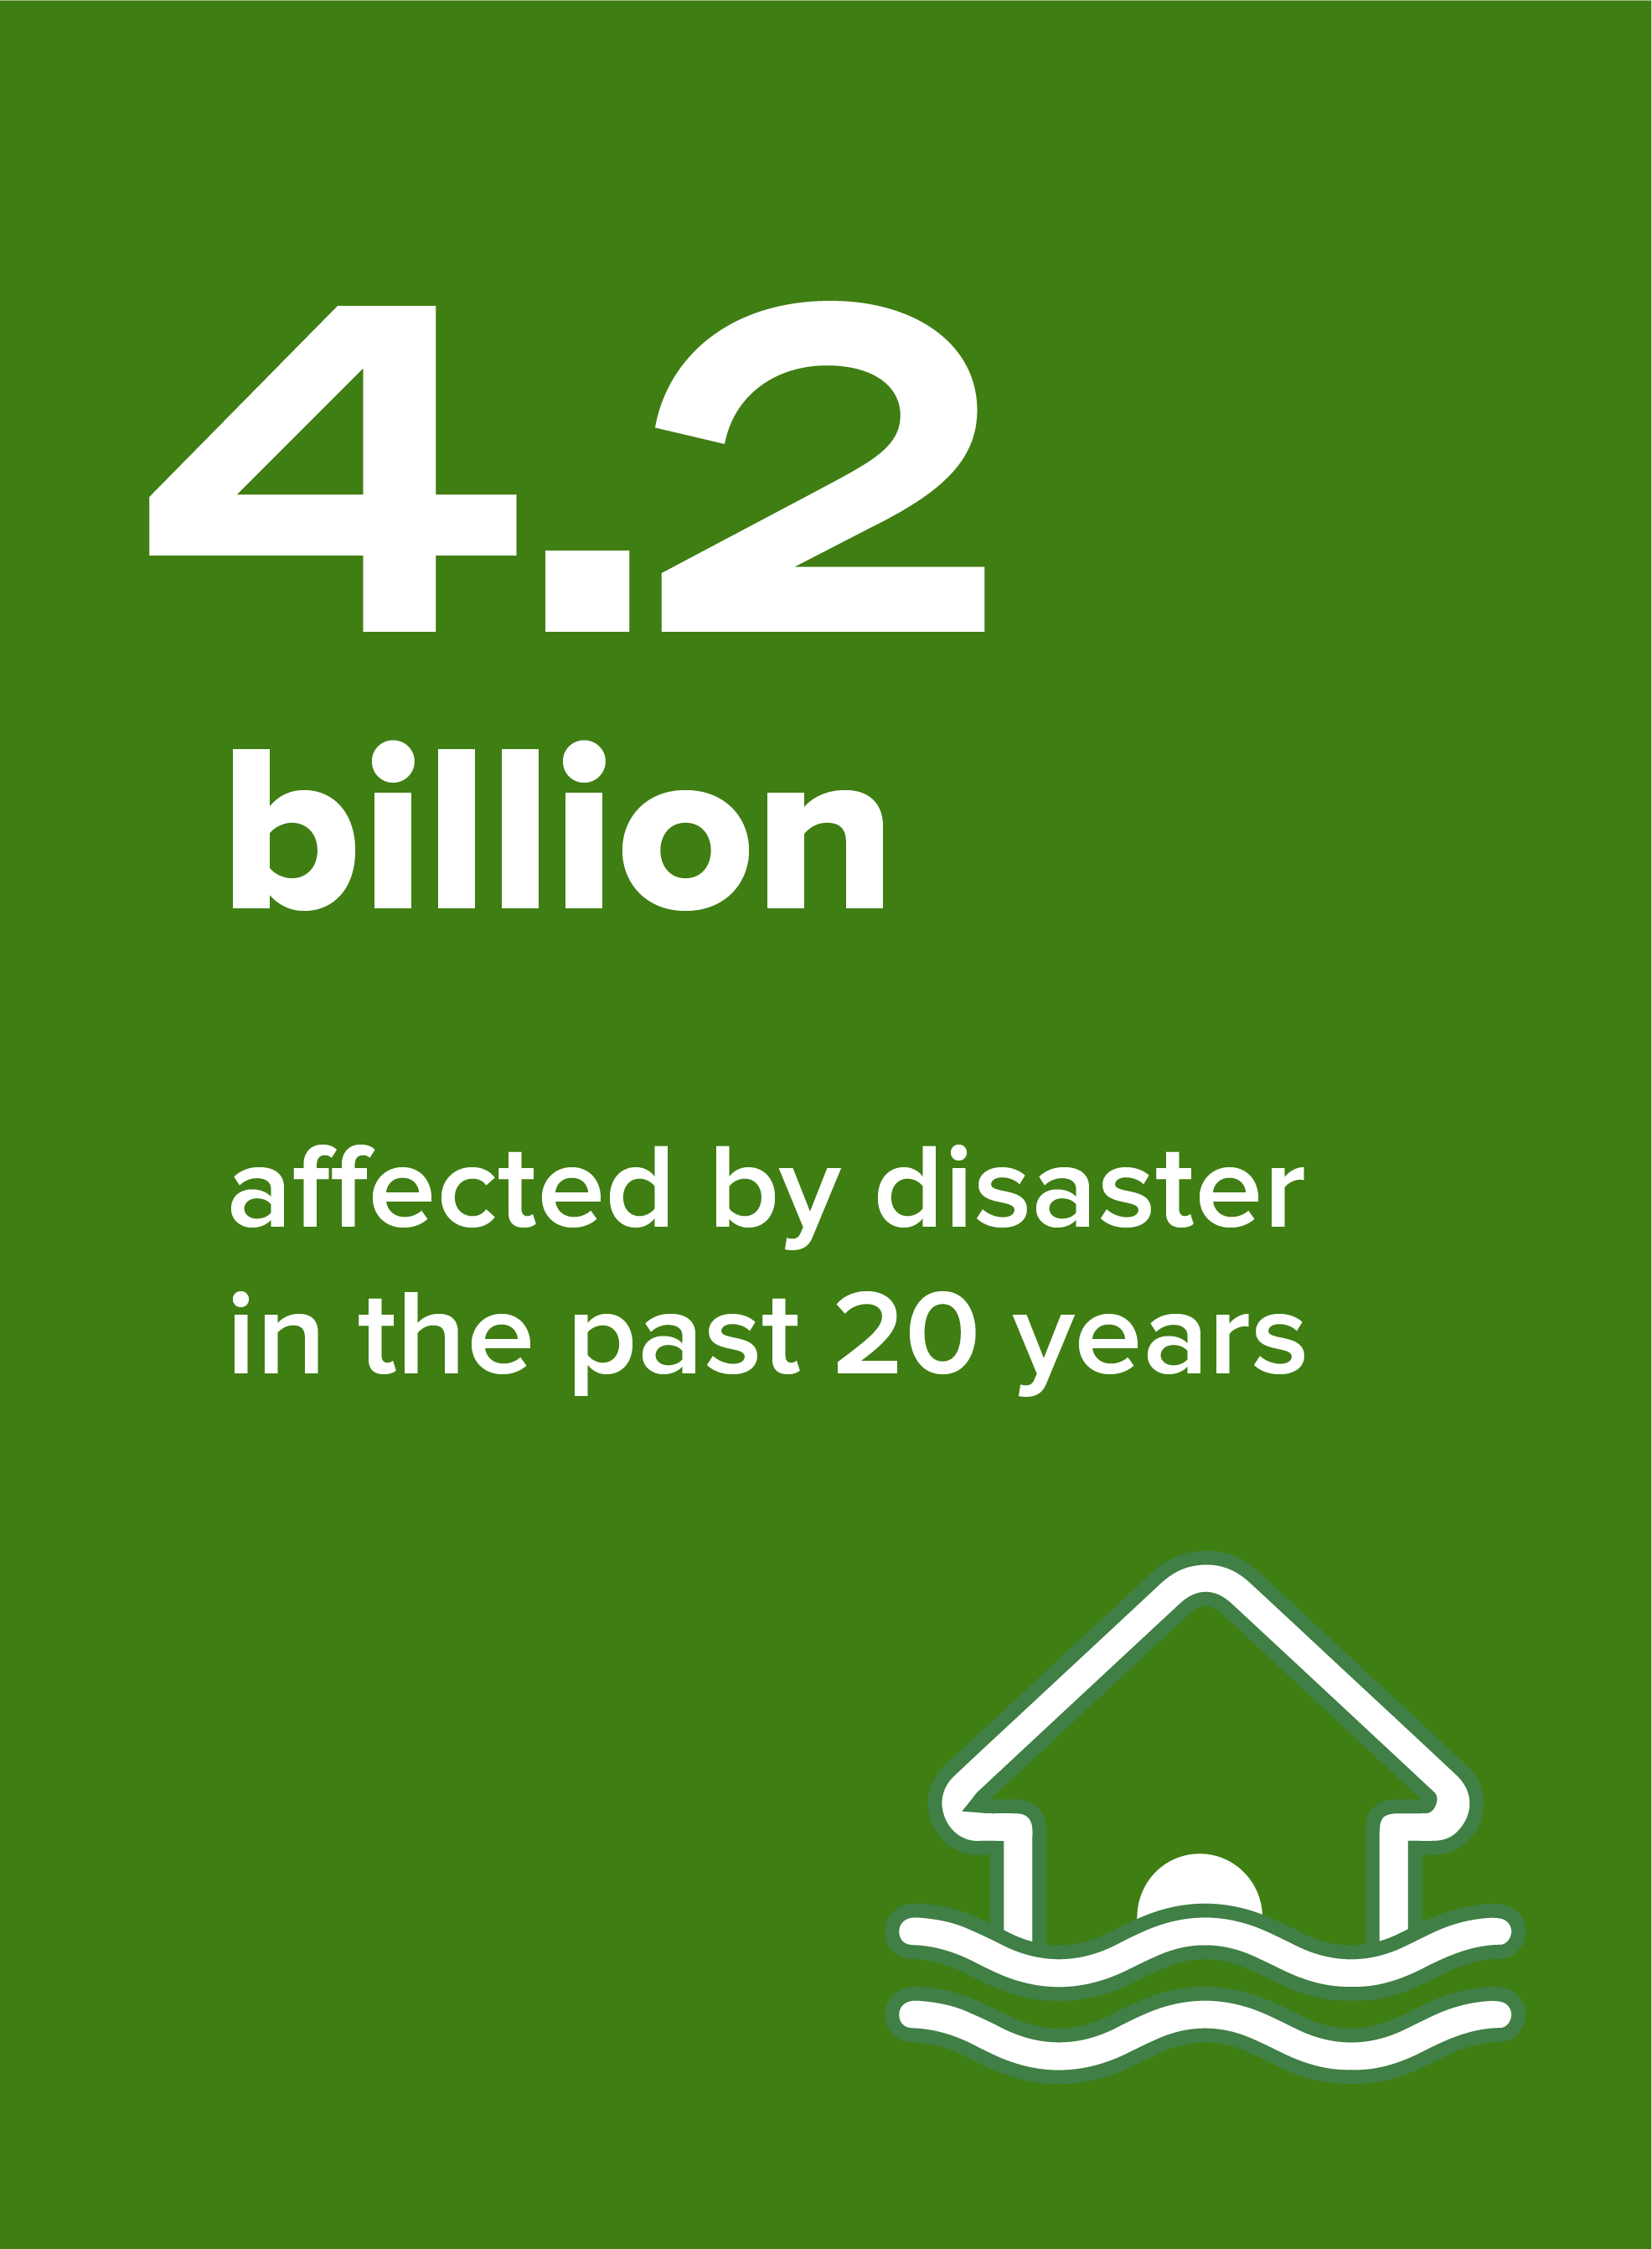 4.2 billion people affected by disaster in the past 20 years